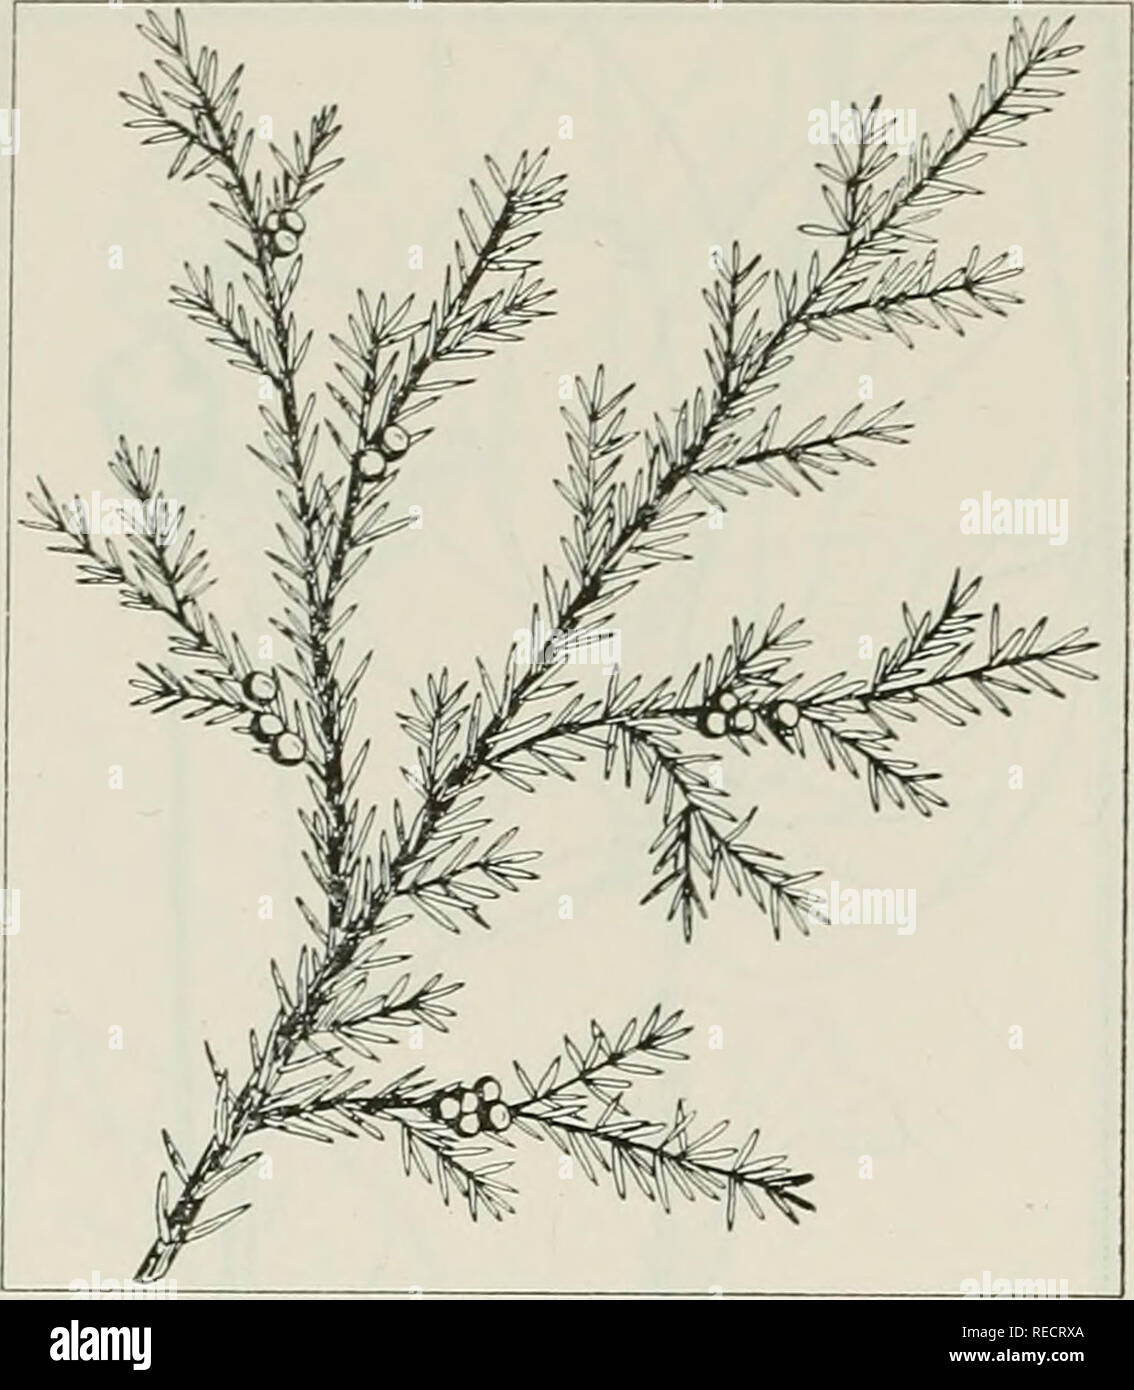 . The drug plants of Illinois. Botany, Medical; Botany. 70 ILLINOIS NATURAL HISTORY SURVEY Circular 44. JUNIPERUS COMMUNIS L. Com- mon juniper, hackmatack, horse savin, gorst. Pinaceae. U. S. P. XI, p. 256.— A low and spreading or upright, small shrub or tree, evergreen; bark of the trunk shreddy; foliage in the form of needles, the needles straight, rigid, sharp-pointed, up to ]/i inch long; flowers lacking, cones present instead; fruit blue, glaucous, berry- like, 14 inch in diameter, 3-seeded. The fruit collected in fall and winter, when ripe. In cultivation as an ornamen- tal; established  Stock Photo